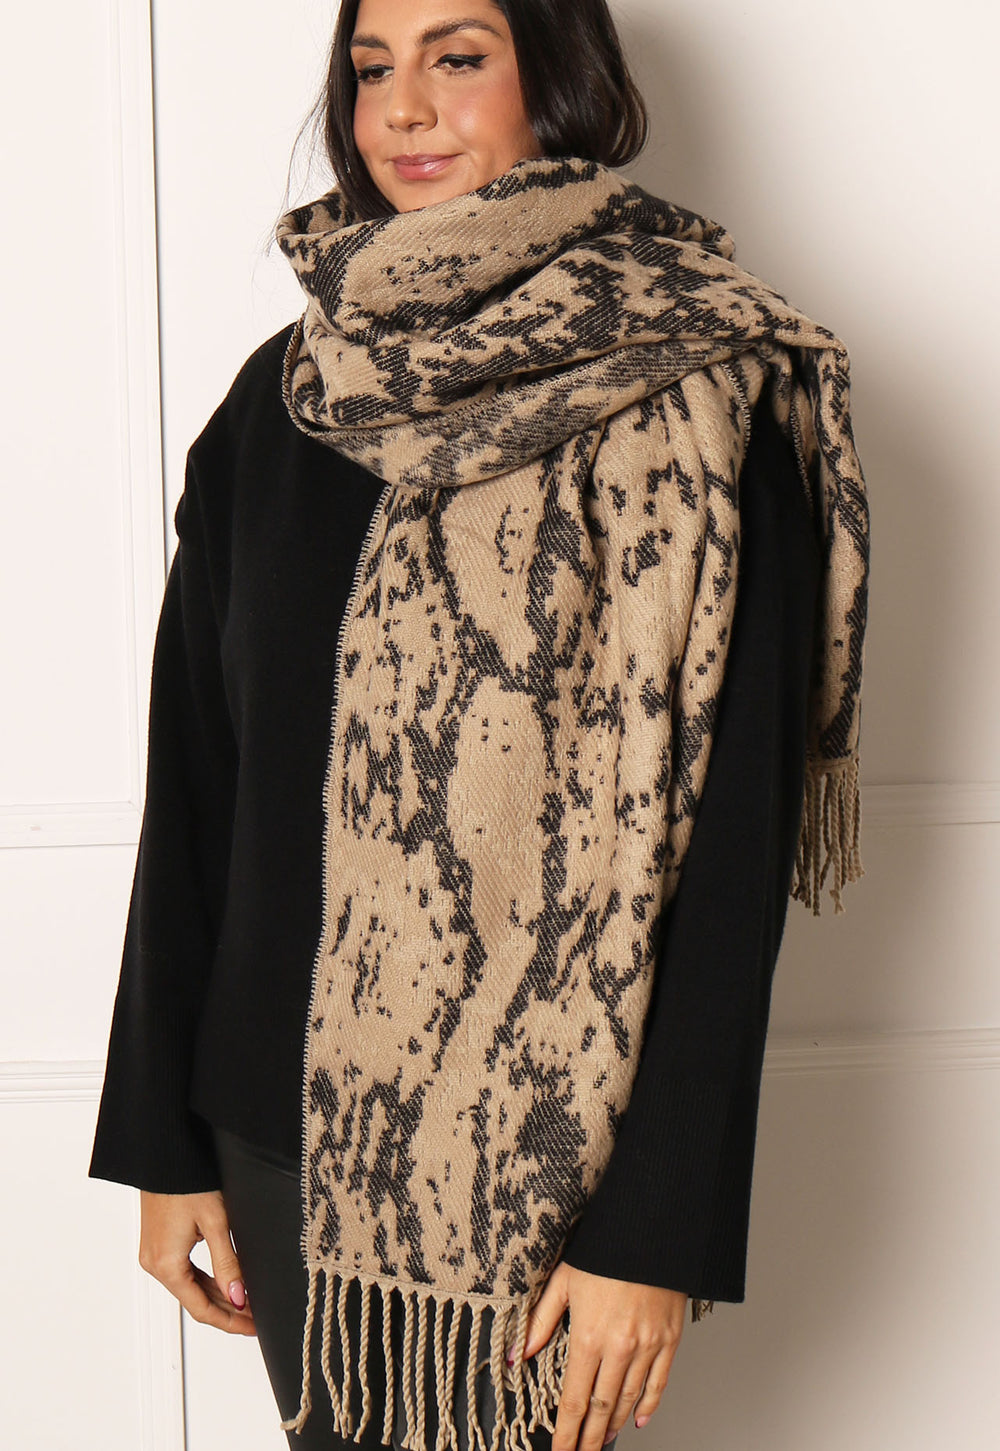 PIECES Animal Snake Print Oversized Brushed Scarf with Tassels in Beige & Black - One Nation Clothing